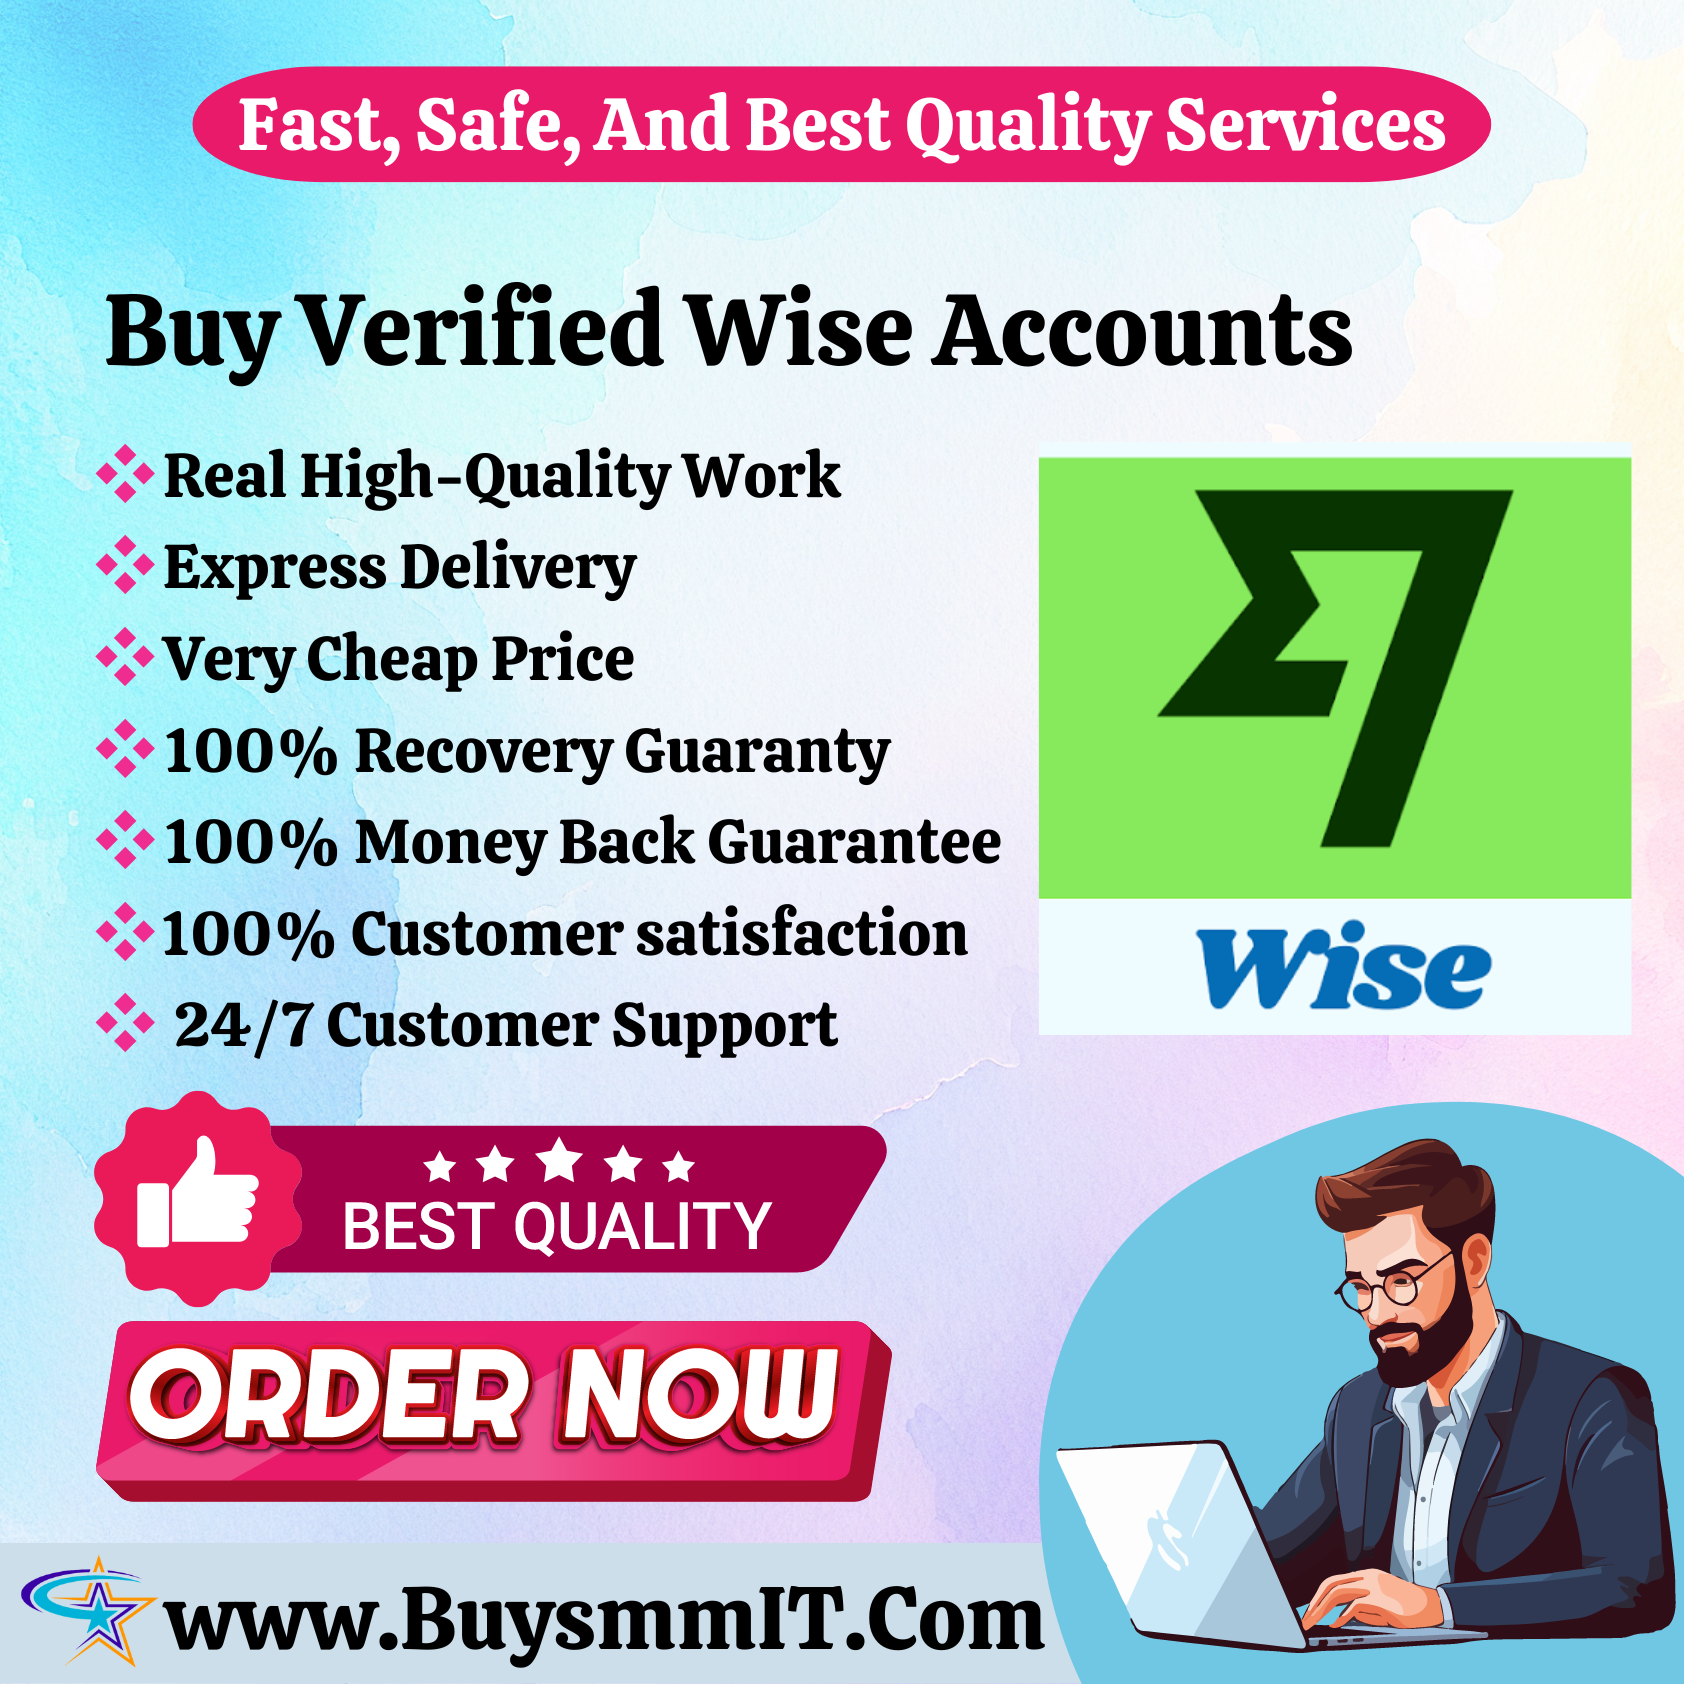 Buy Verified Wise Accounts - 100% Verified, Safe And Cheap